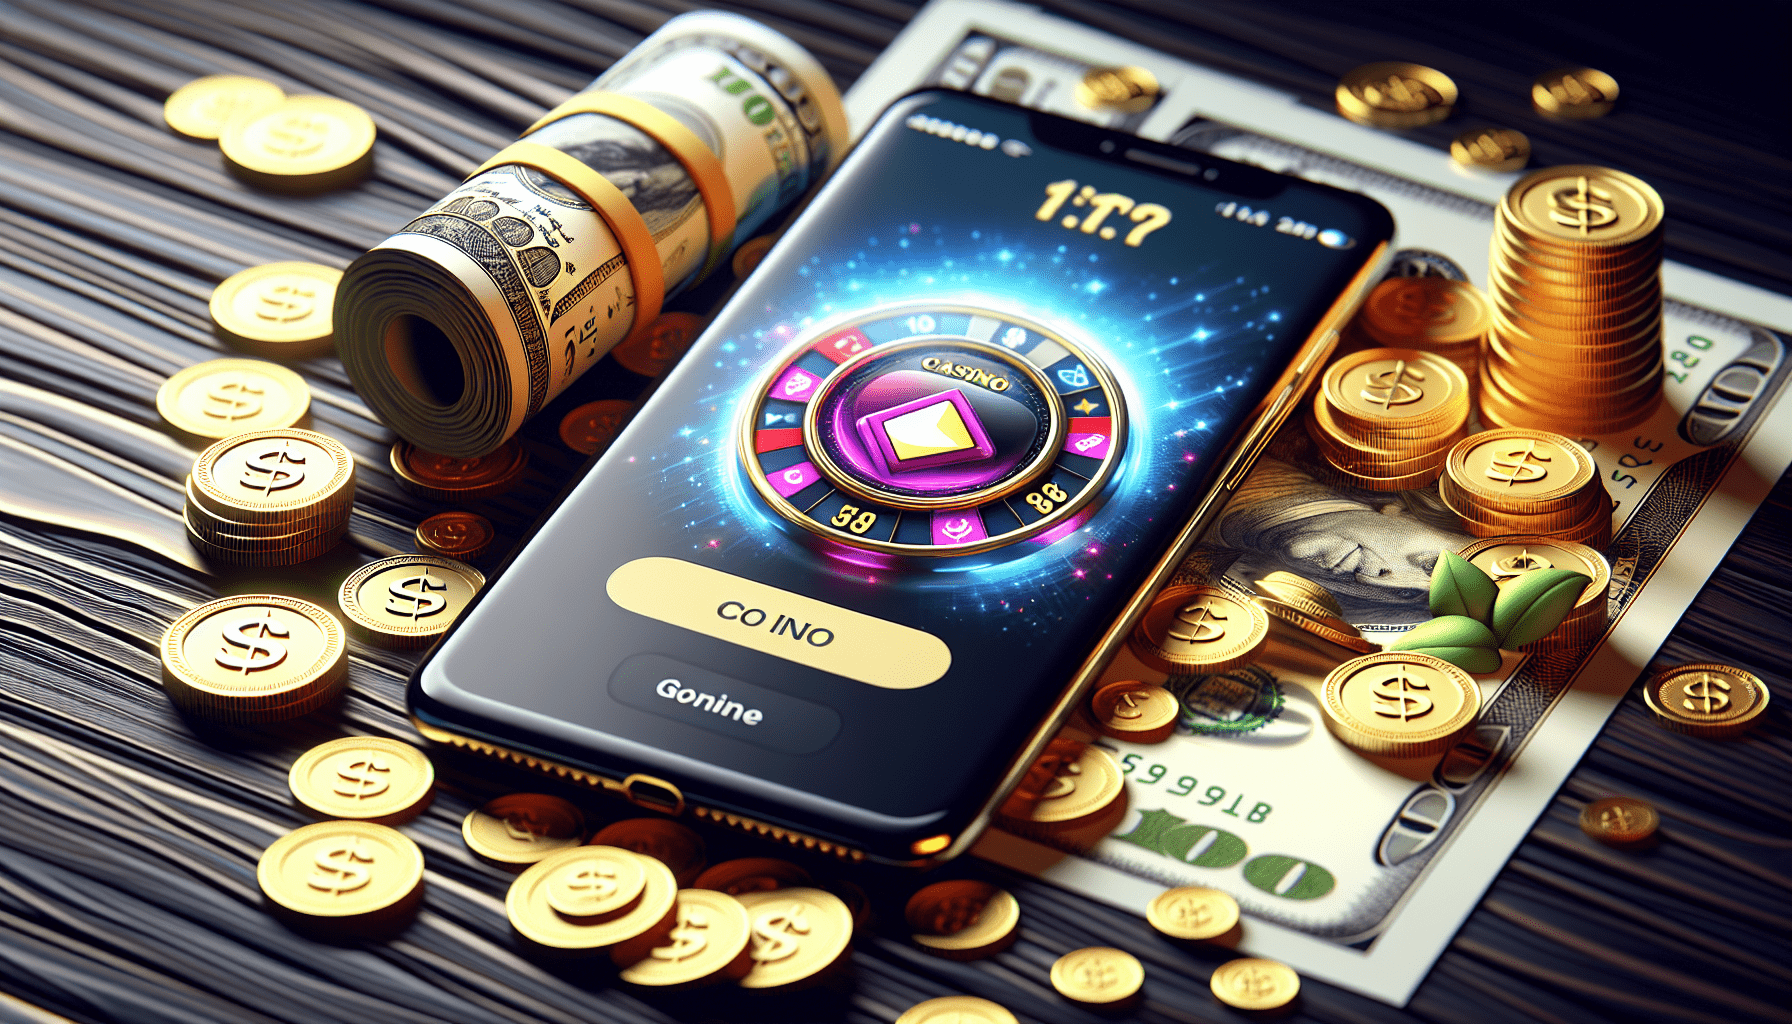 Can I Win Real Money On Casino Apps?